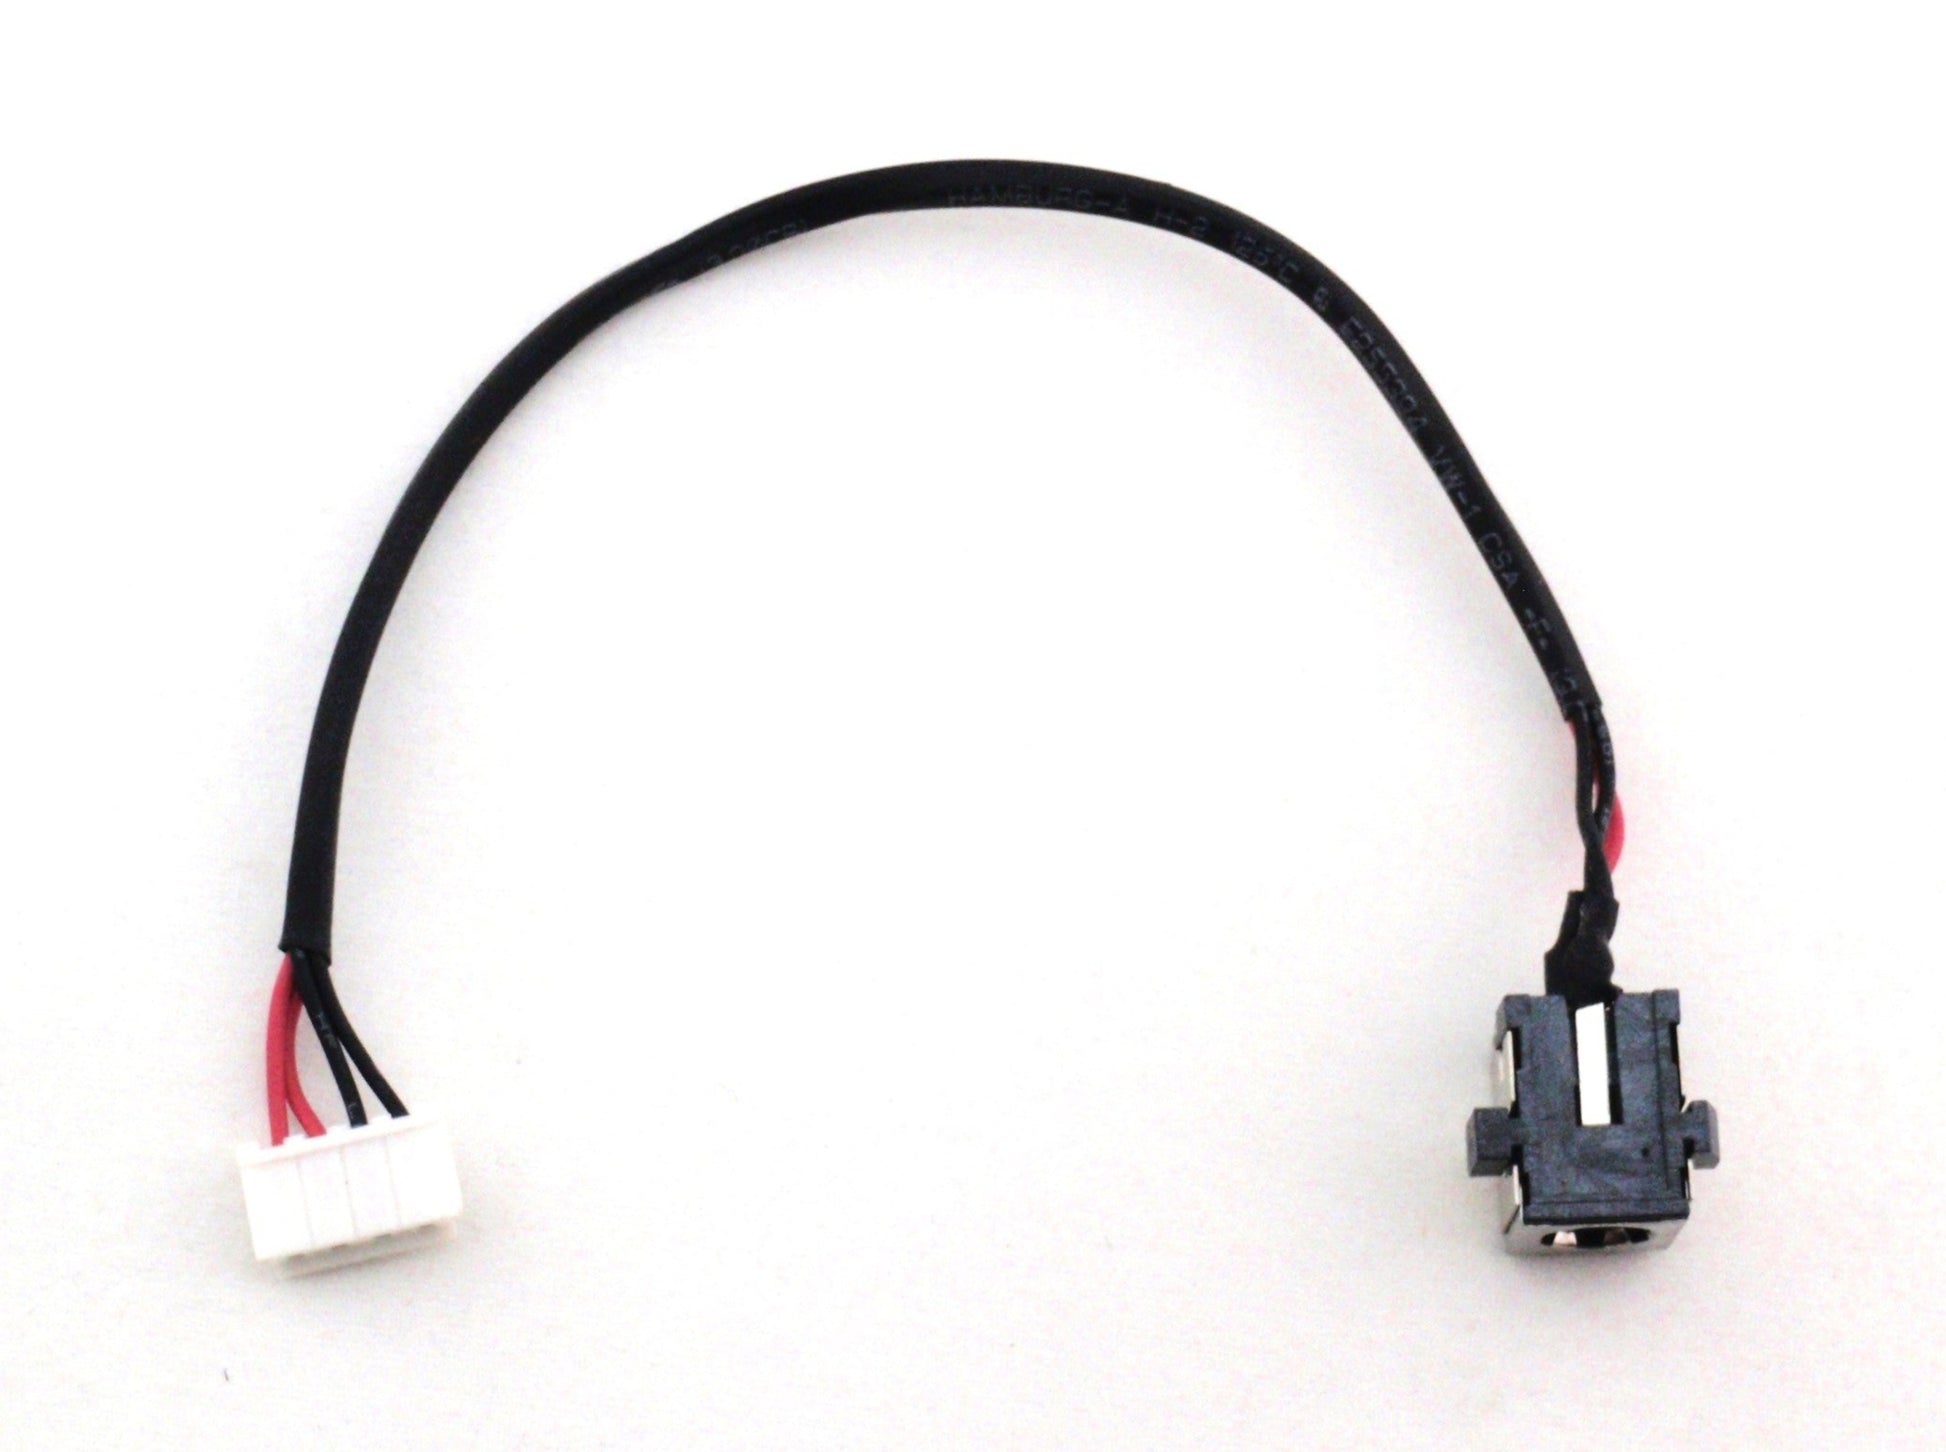 ASUS DC Power Jack Charging Cable F55A F55C F55S F55SA F55SR F55SV F55U F55V F55VD X4 X54A X55 X55A X55C X55U 14004-00660000